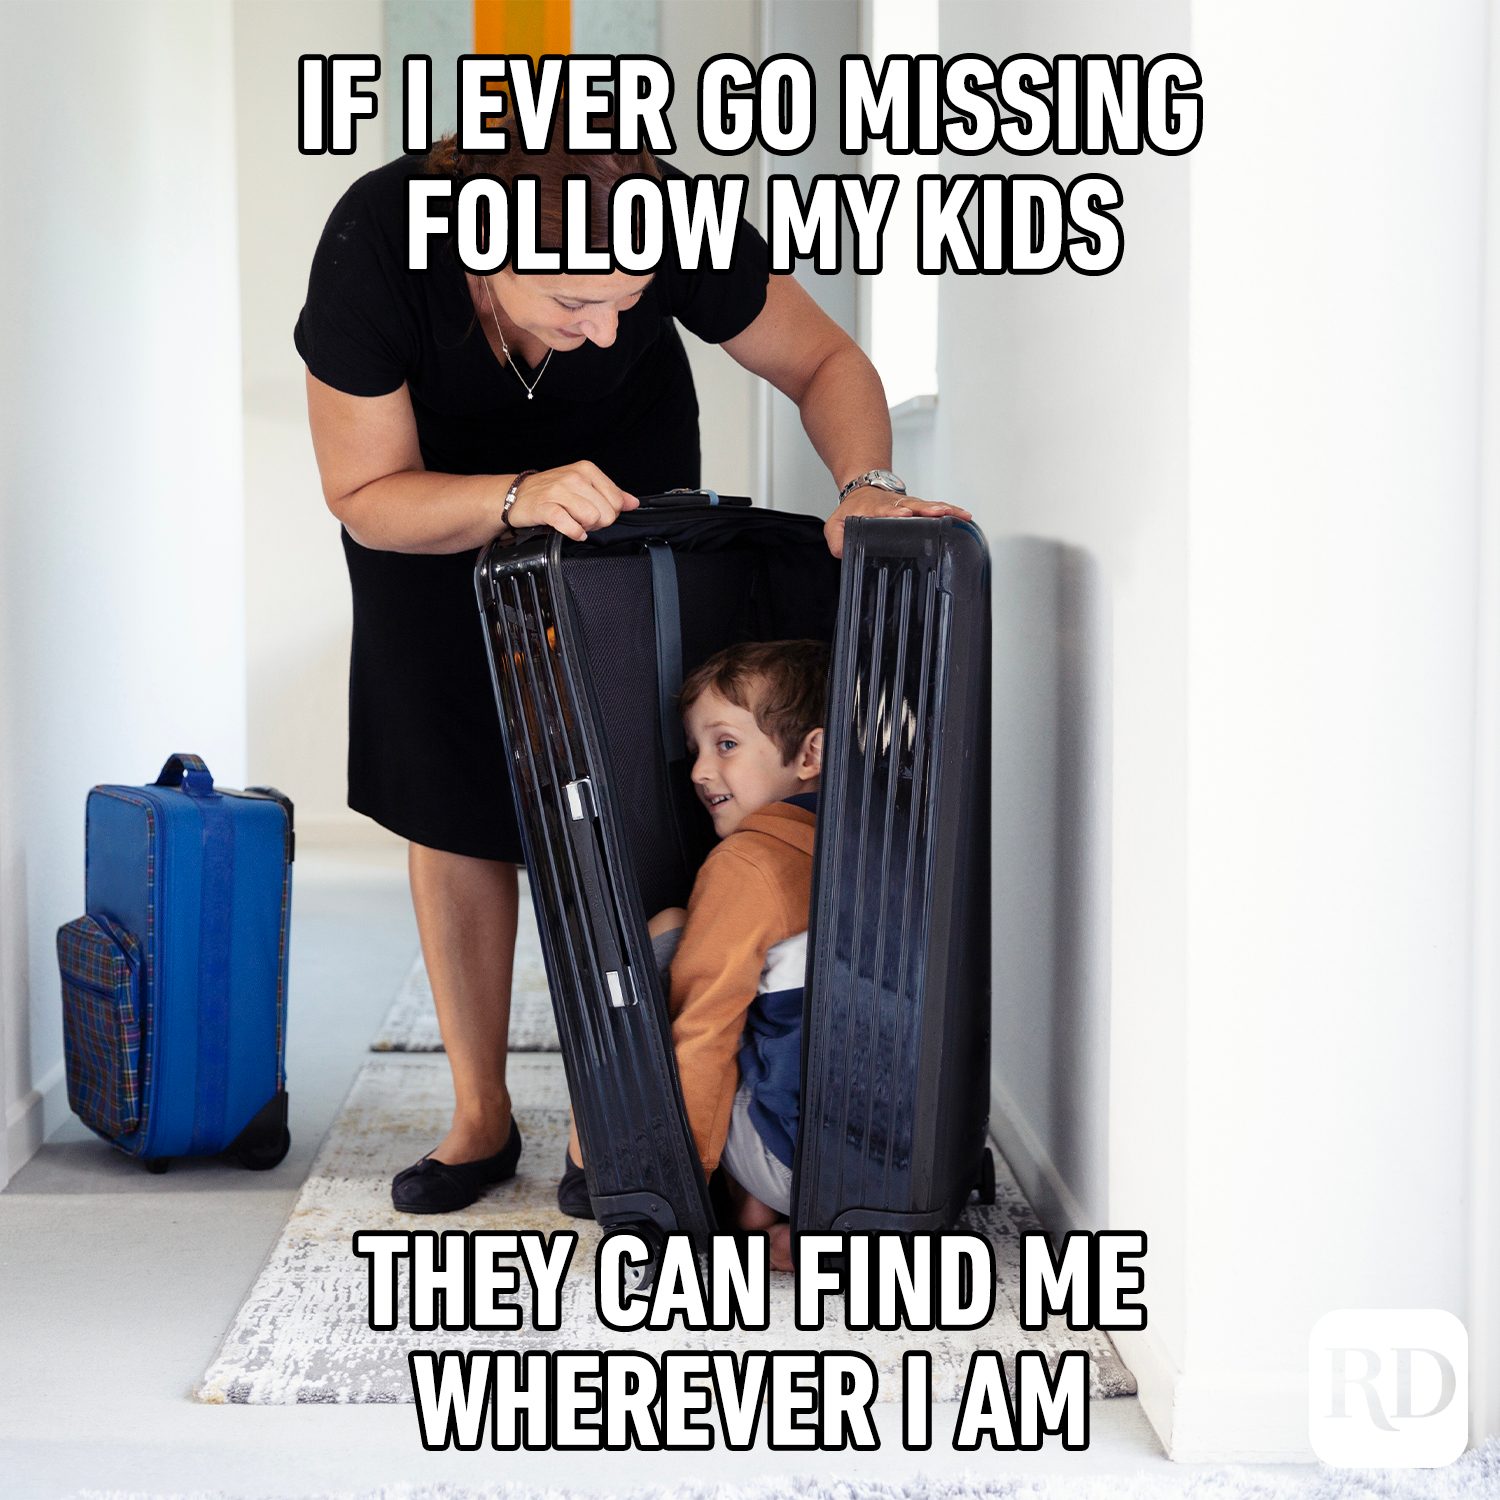 Child in suitcase MEME TEXT: If I ever go missing follow my kids they can find me wherever I am